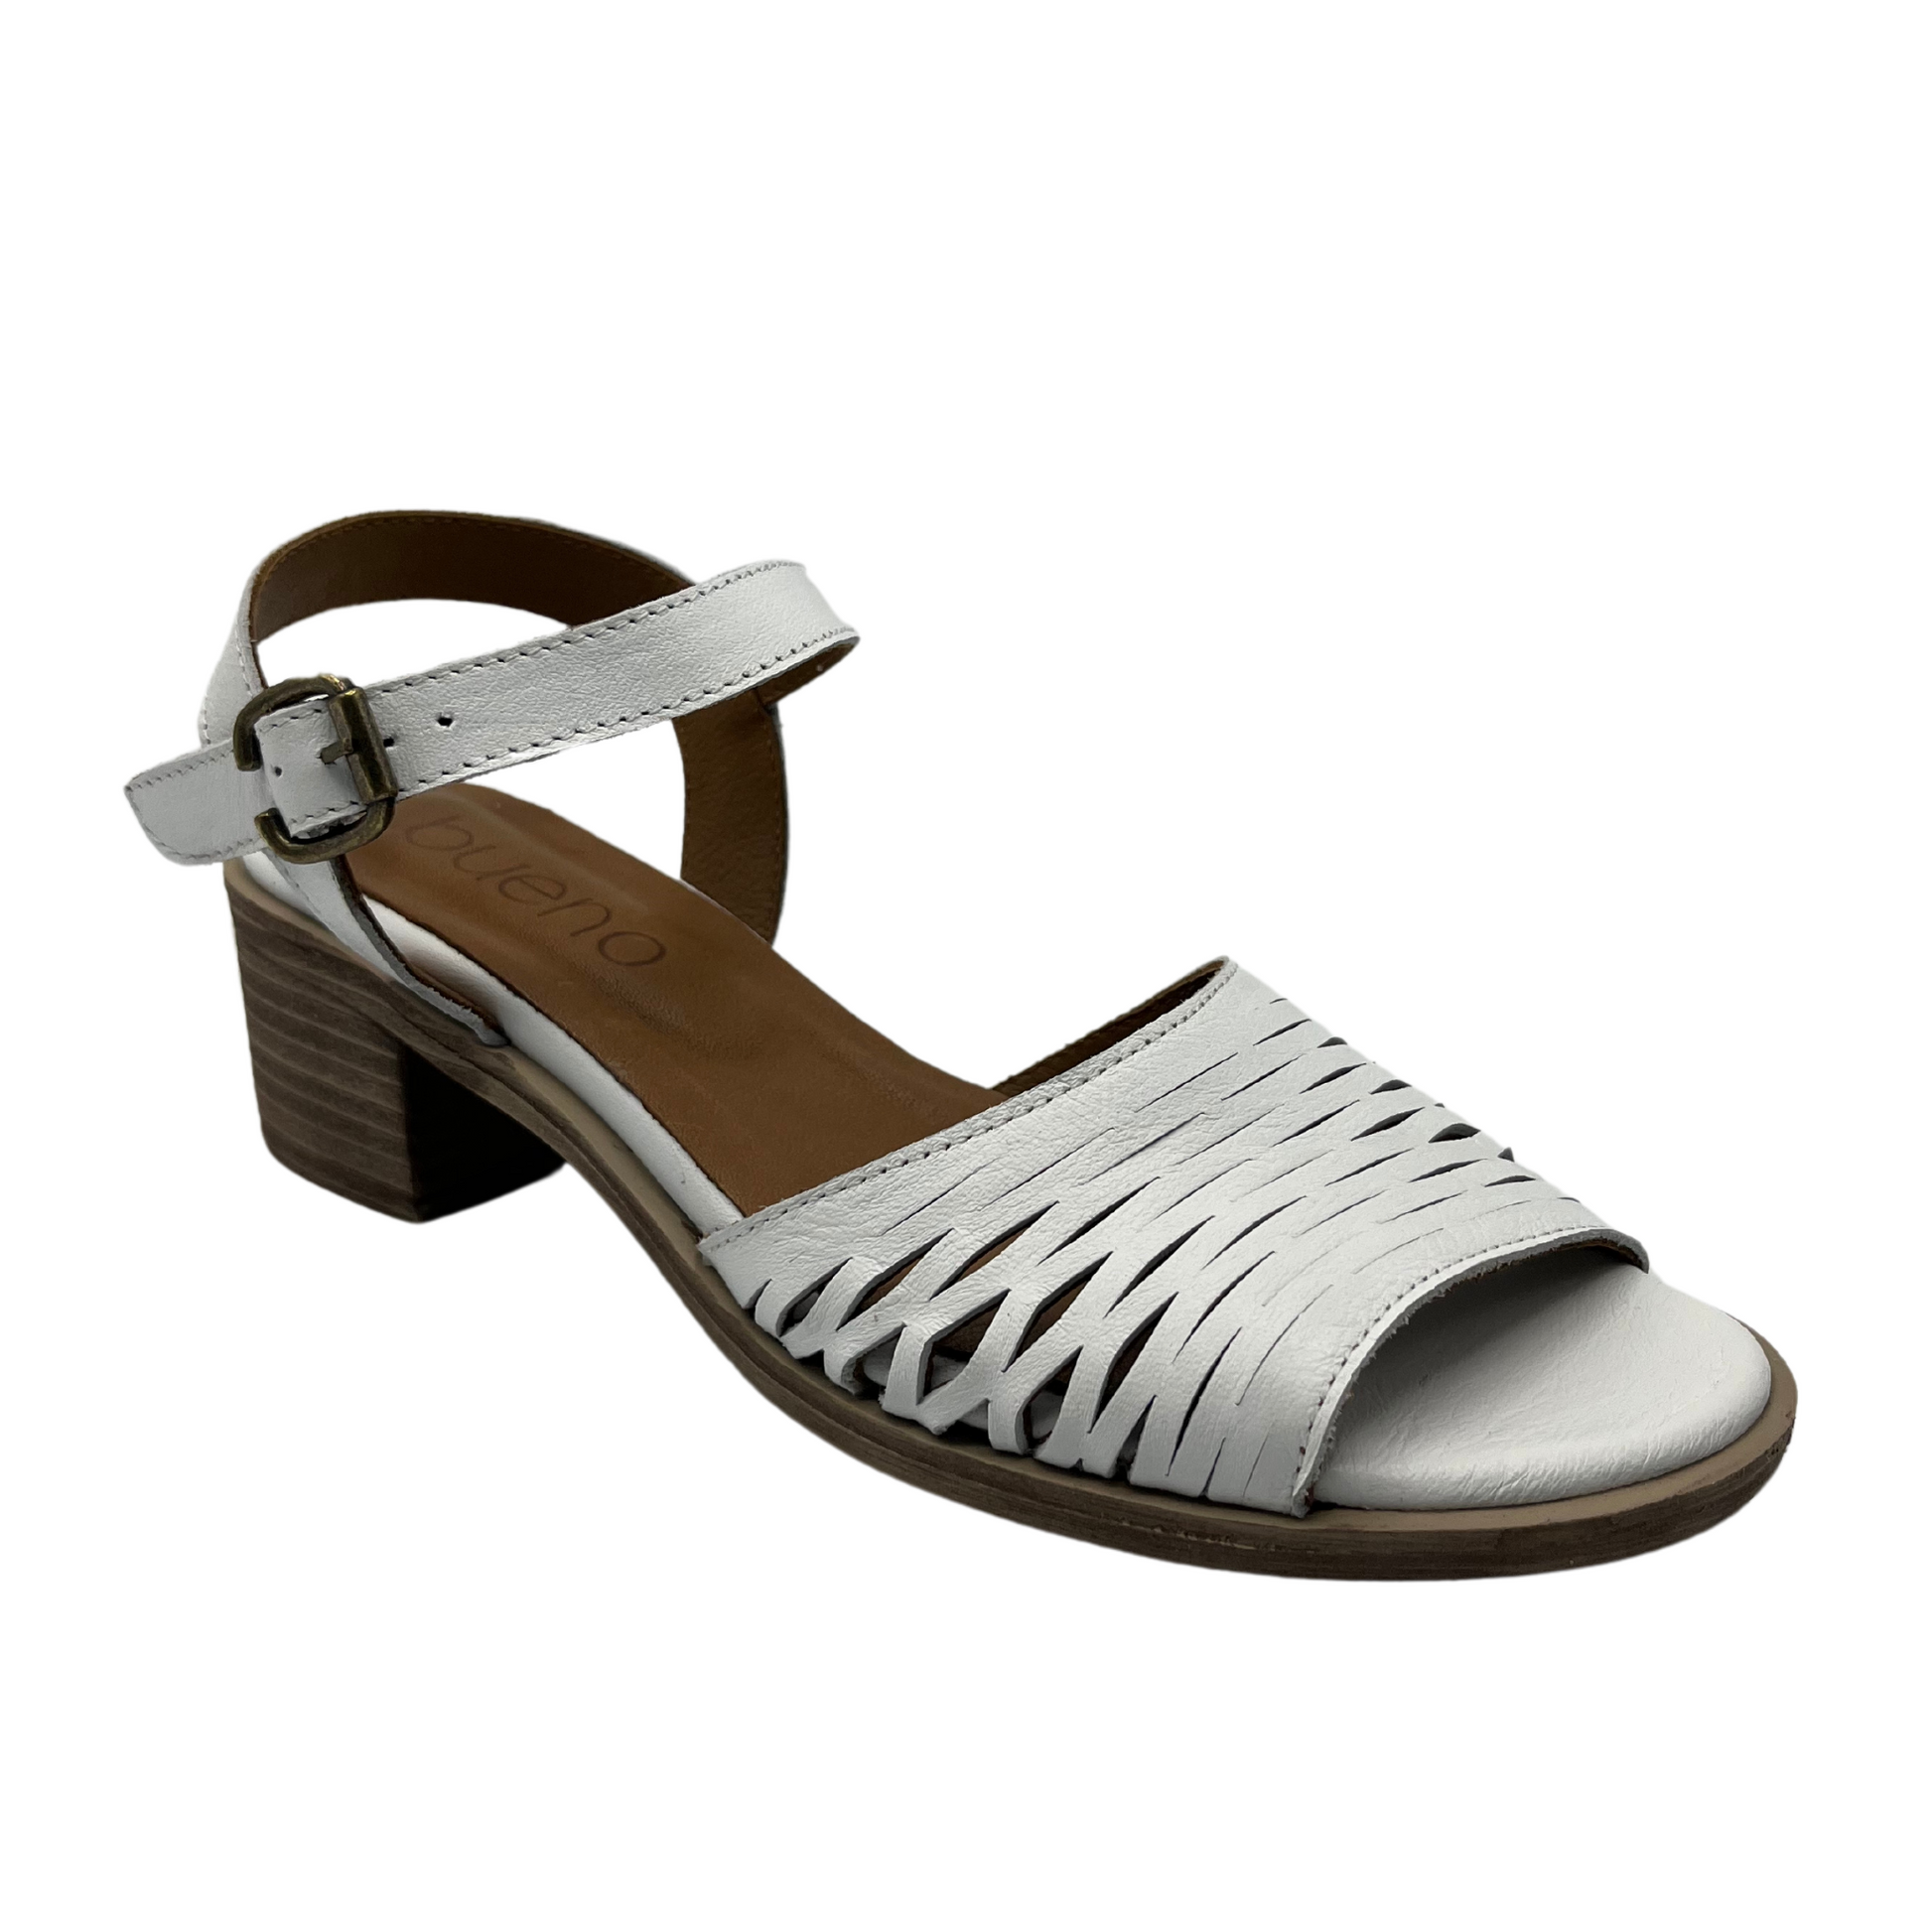 45 degree angled view of white leather sandal with stacked heel and cutout details